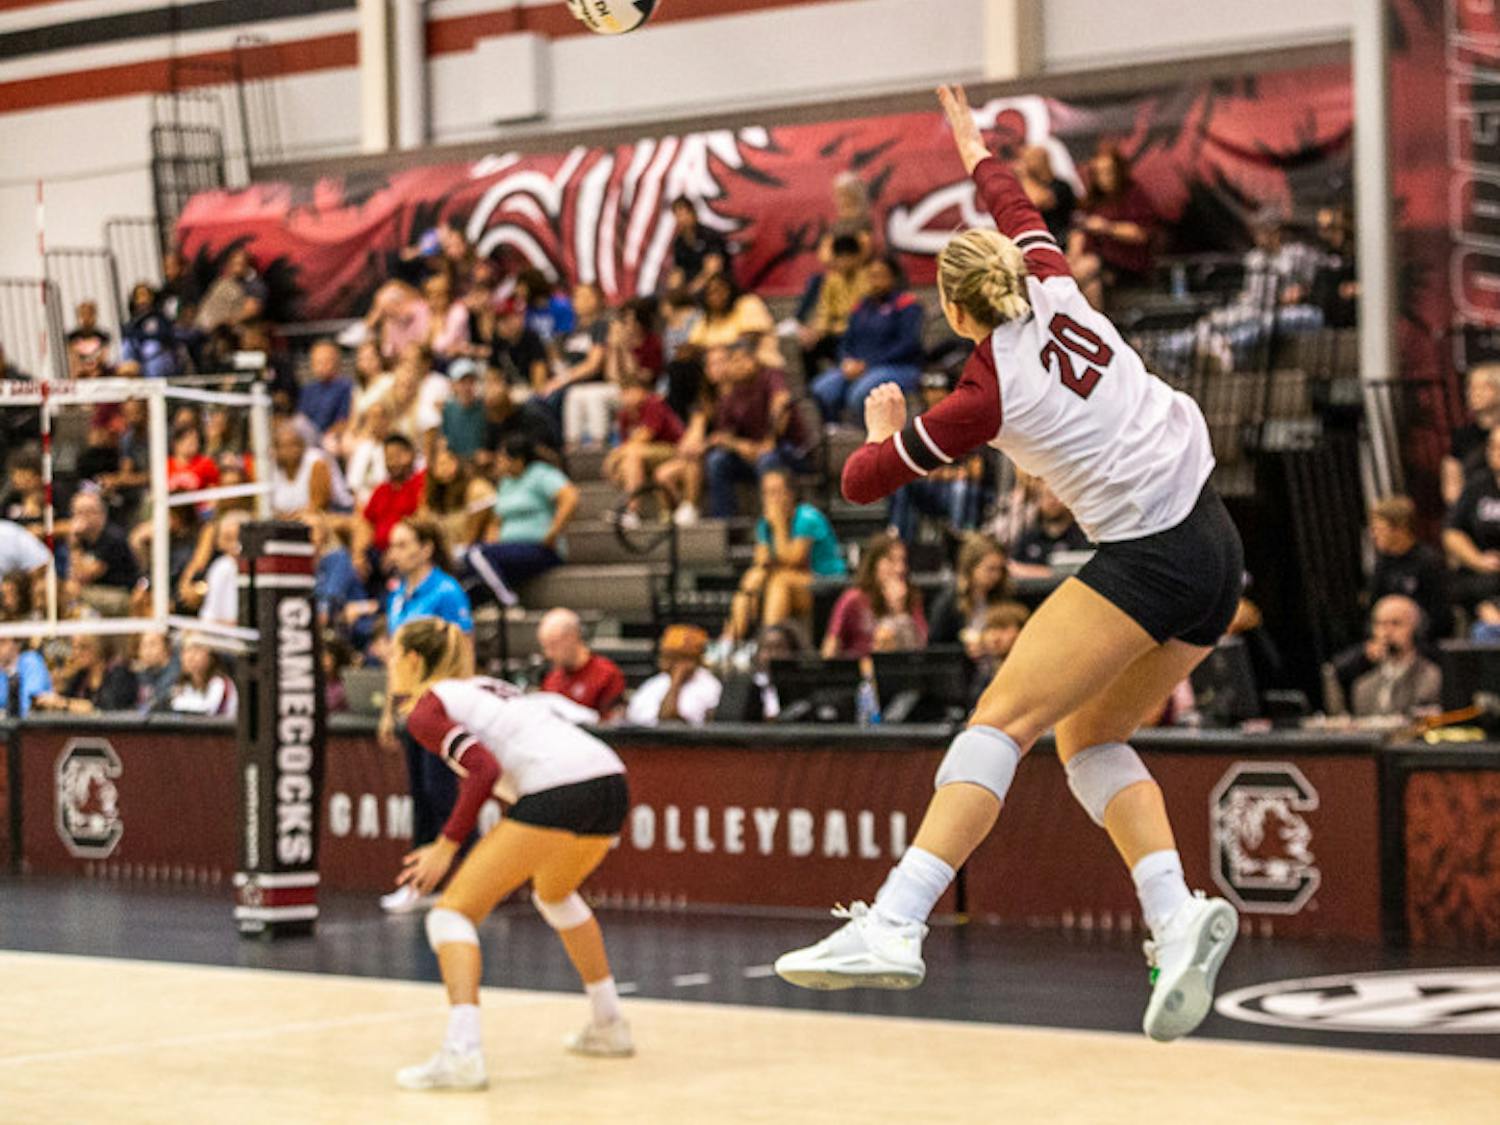 Junior outside hitter Riley Whitesides serves the ball at the South Carolina and Ole Miss matchup on Nov. 5, 2022. Ole Miss bested South Carolina 3-1.